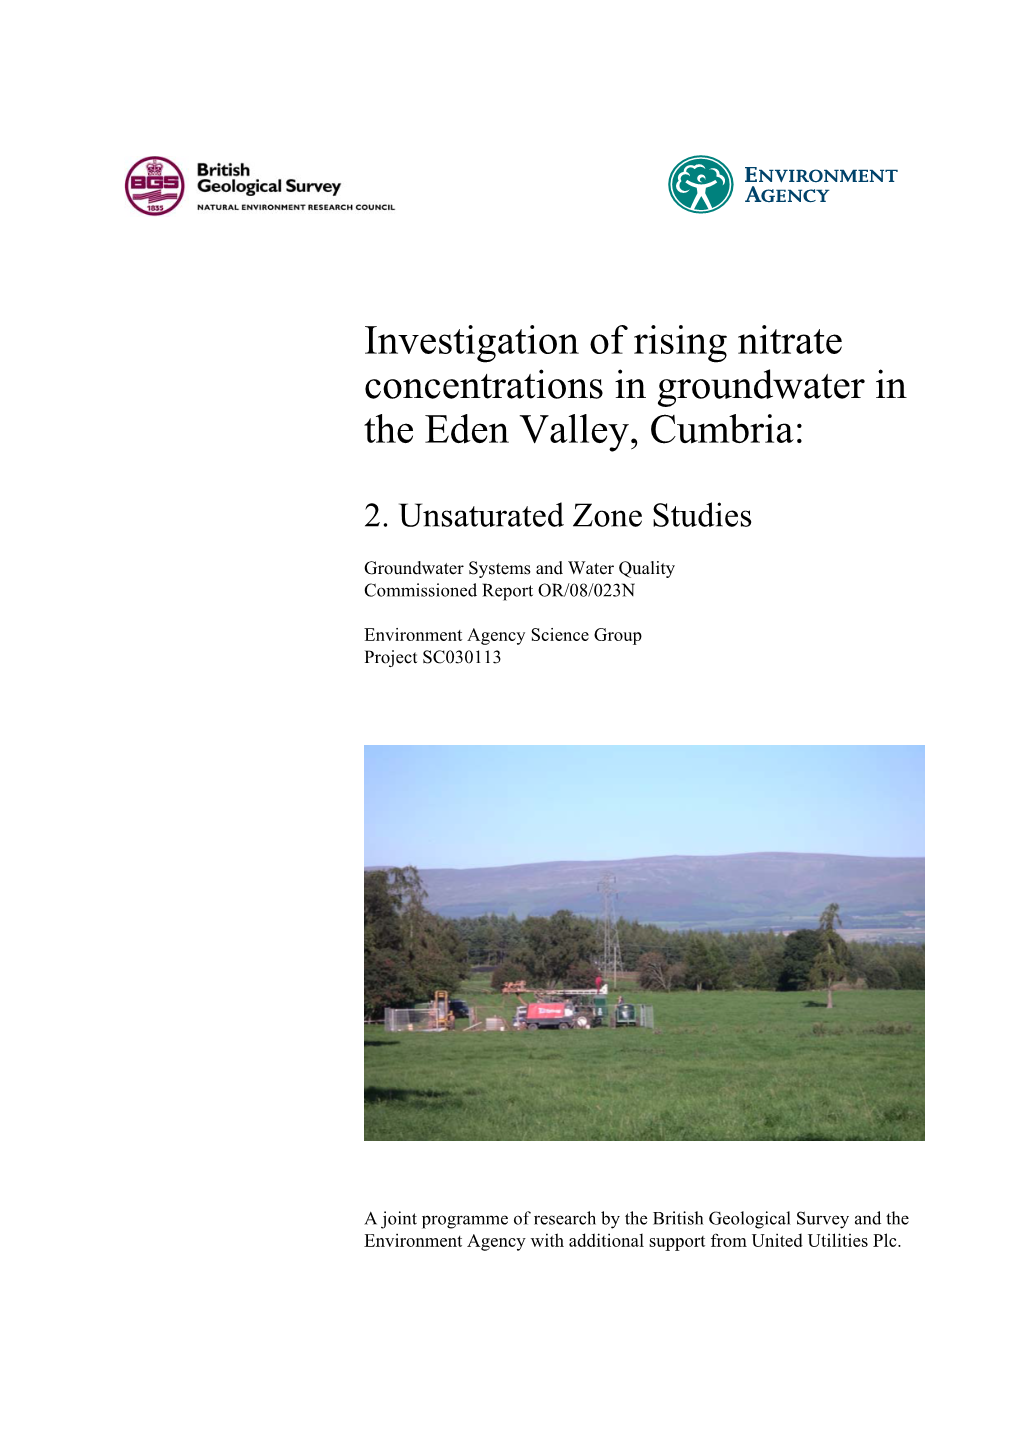 Investigation of Rising Nitrate Concentrations in Groundwater in the Eden Valley, Cumbria